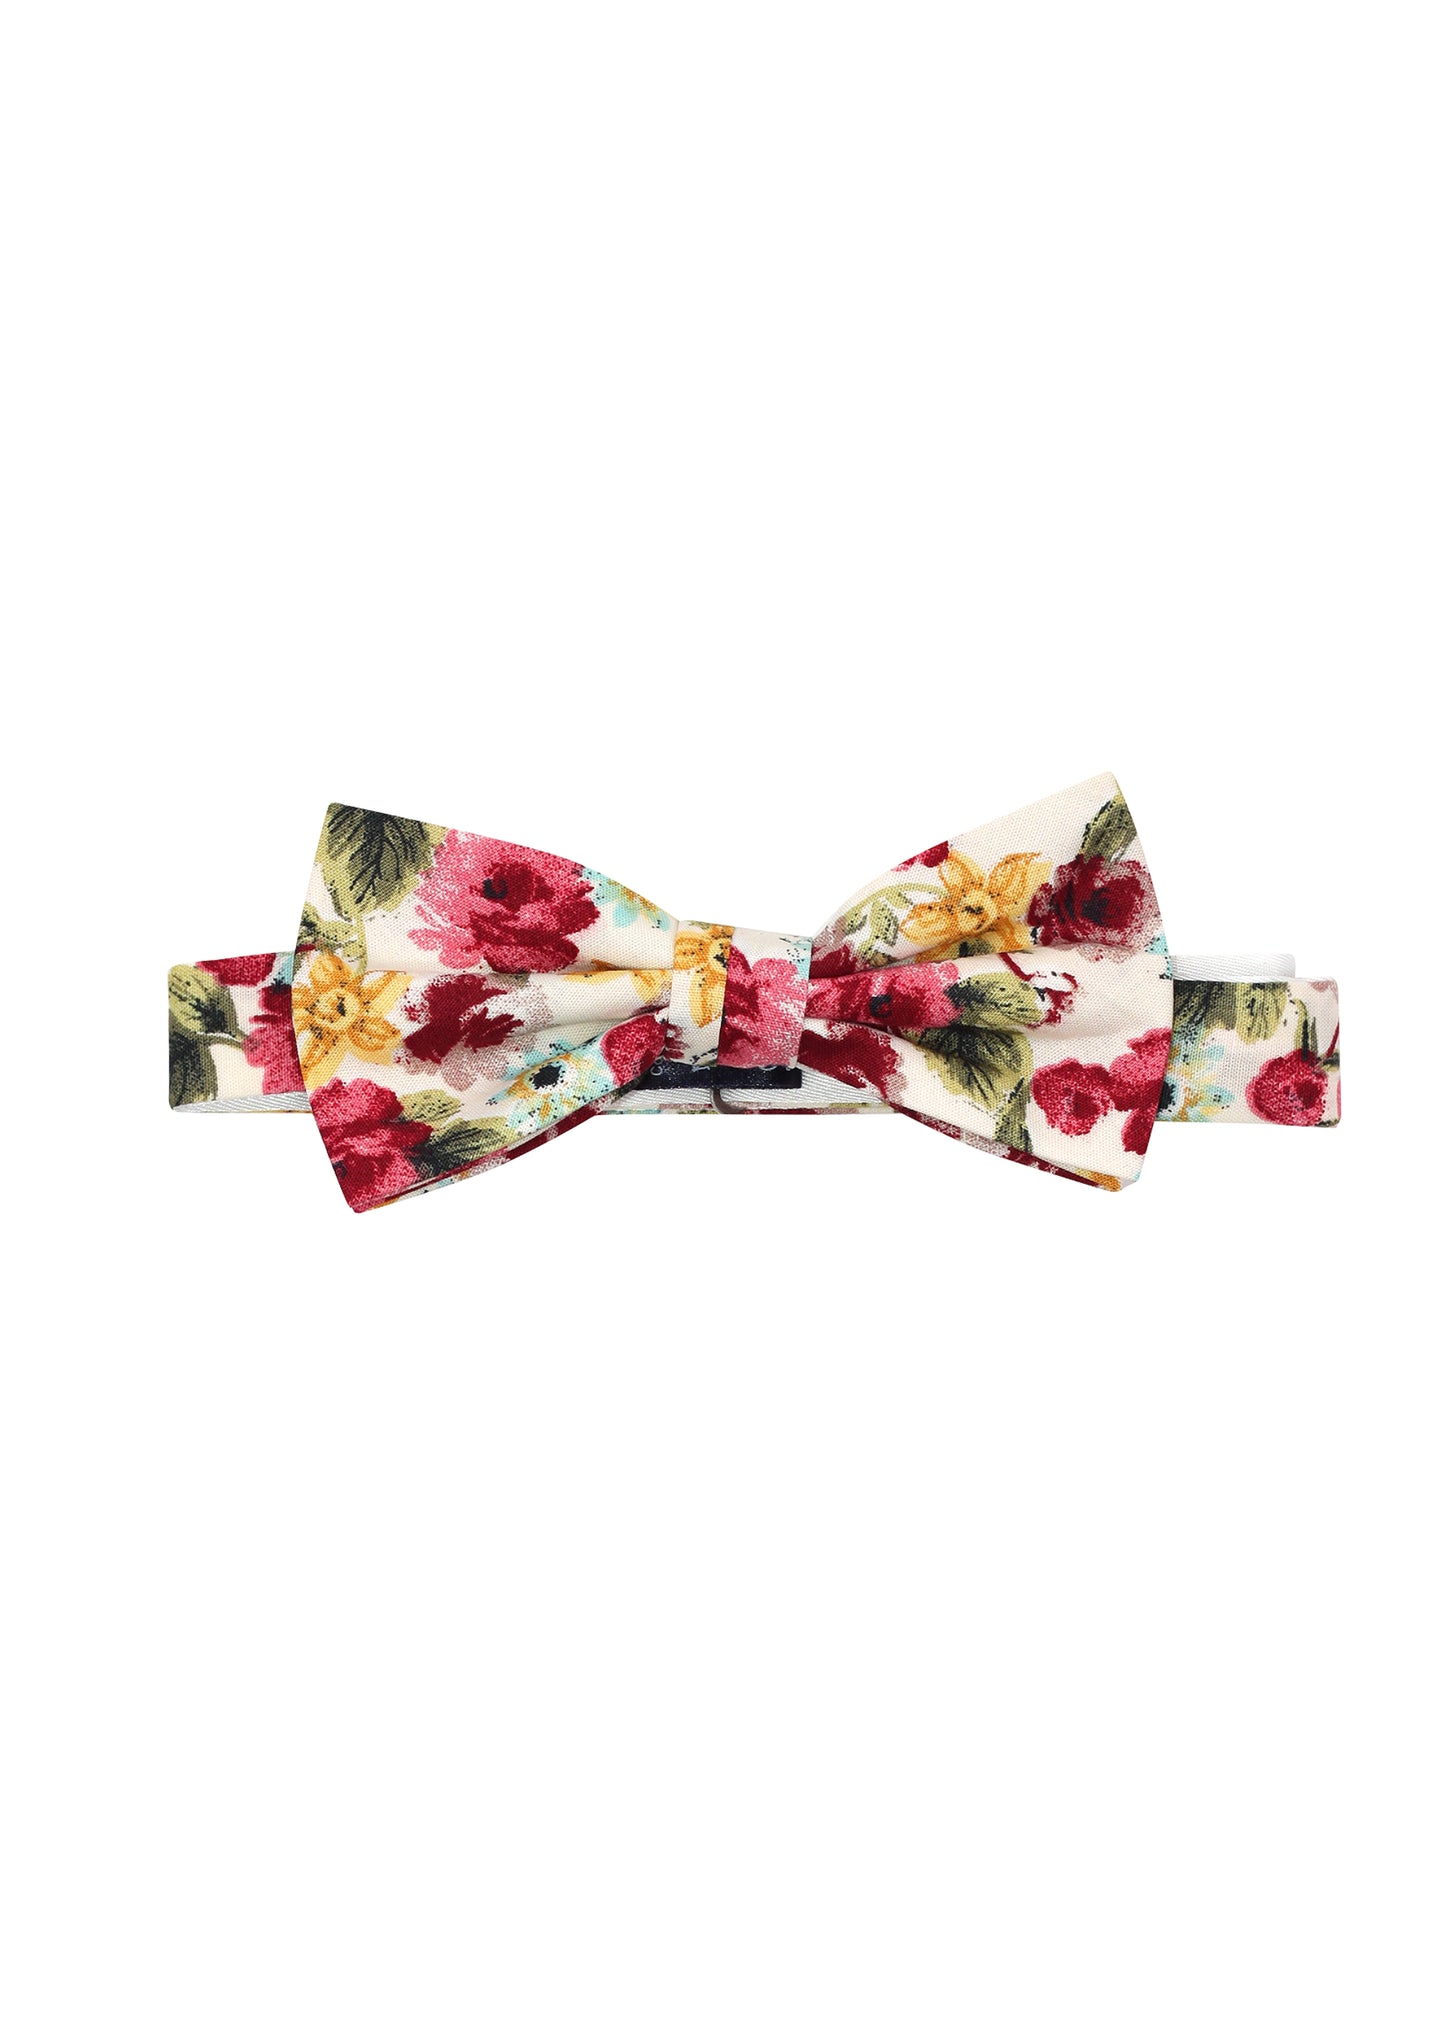 Bow + scarf in floral design